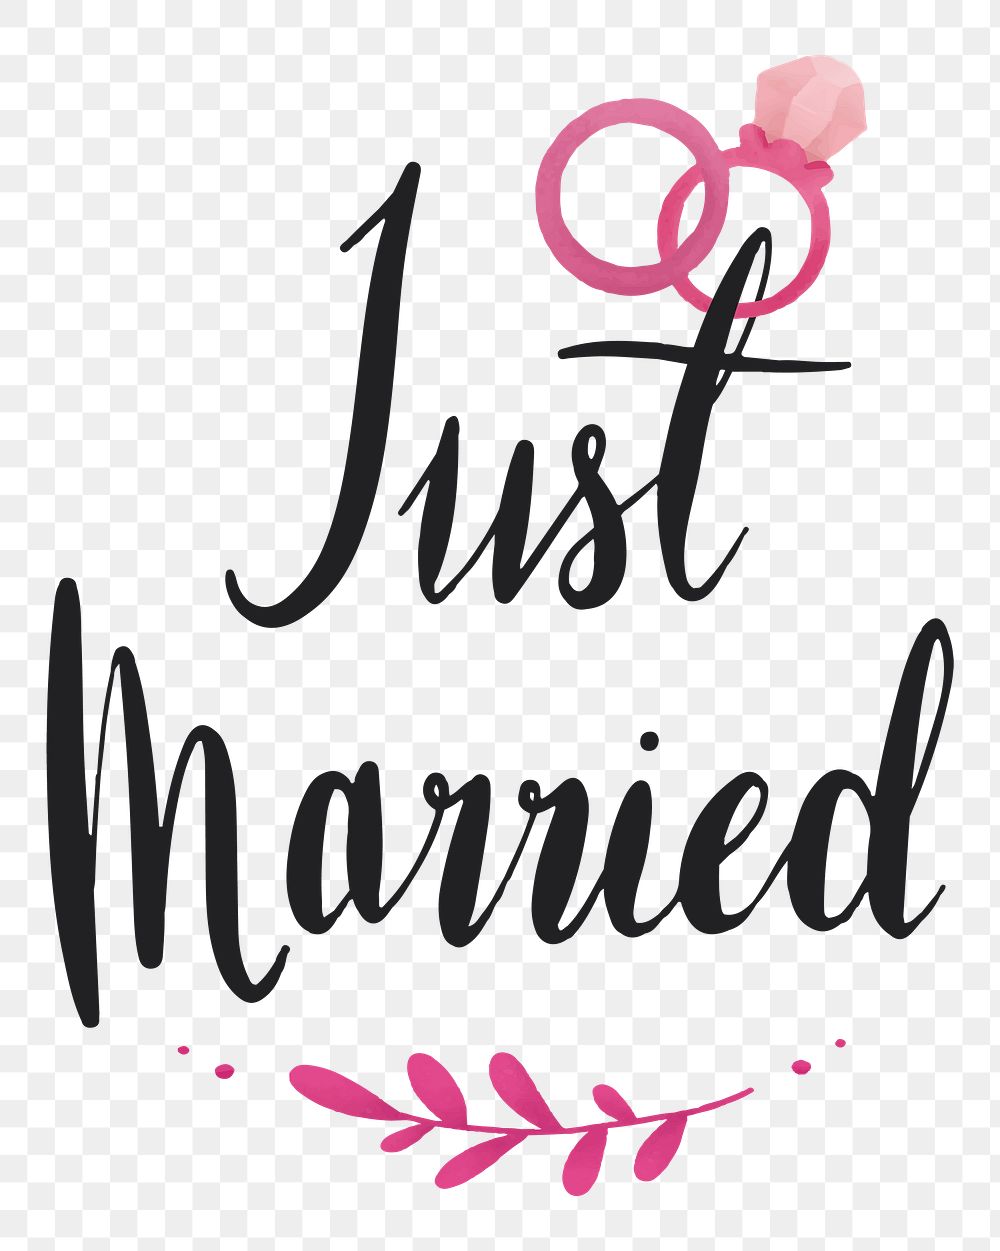 Just married png sticker, transparent background